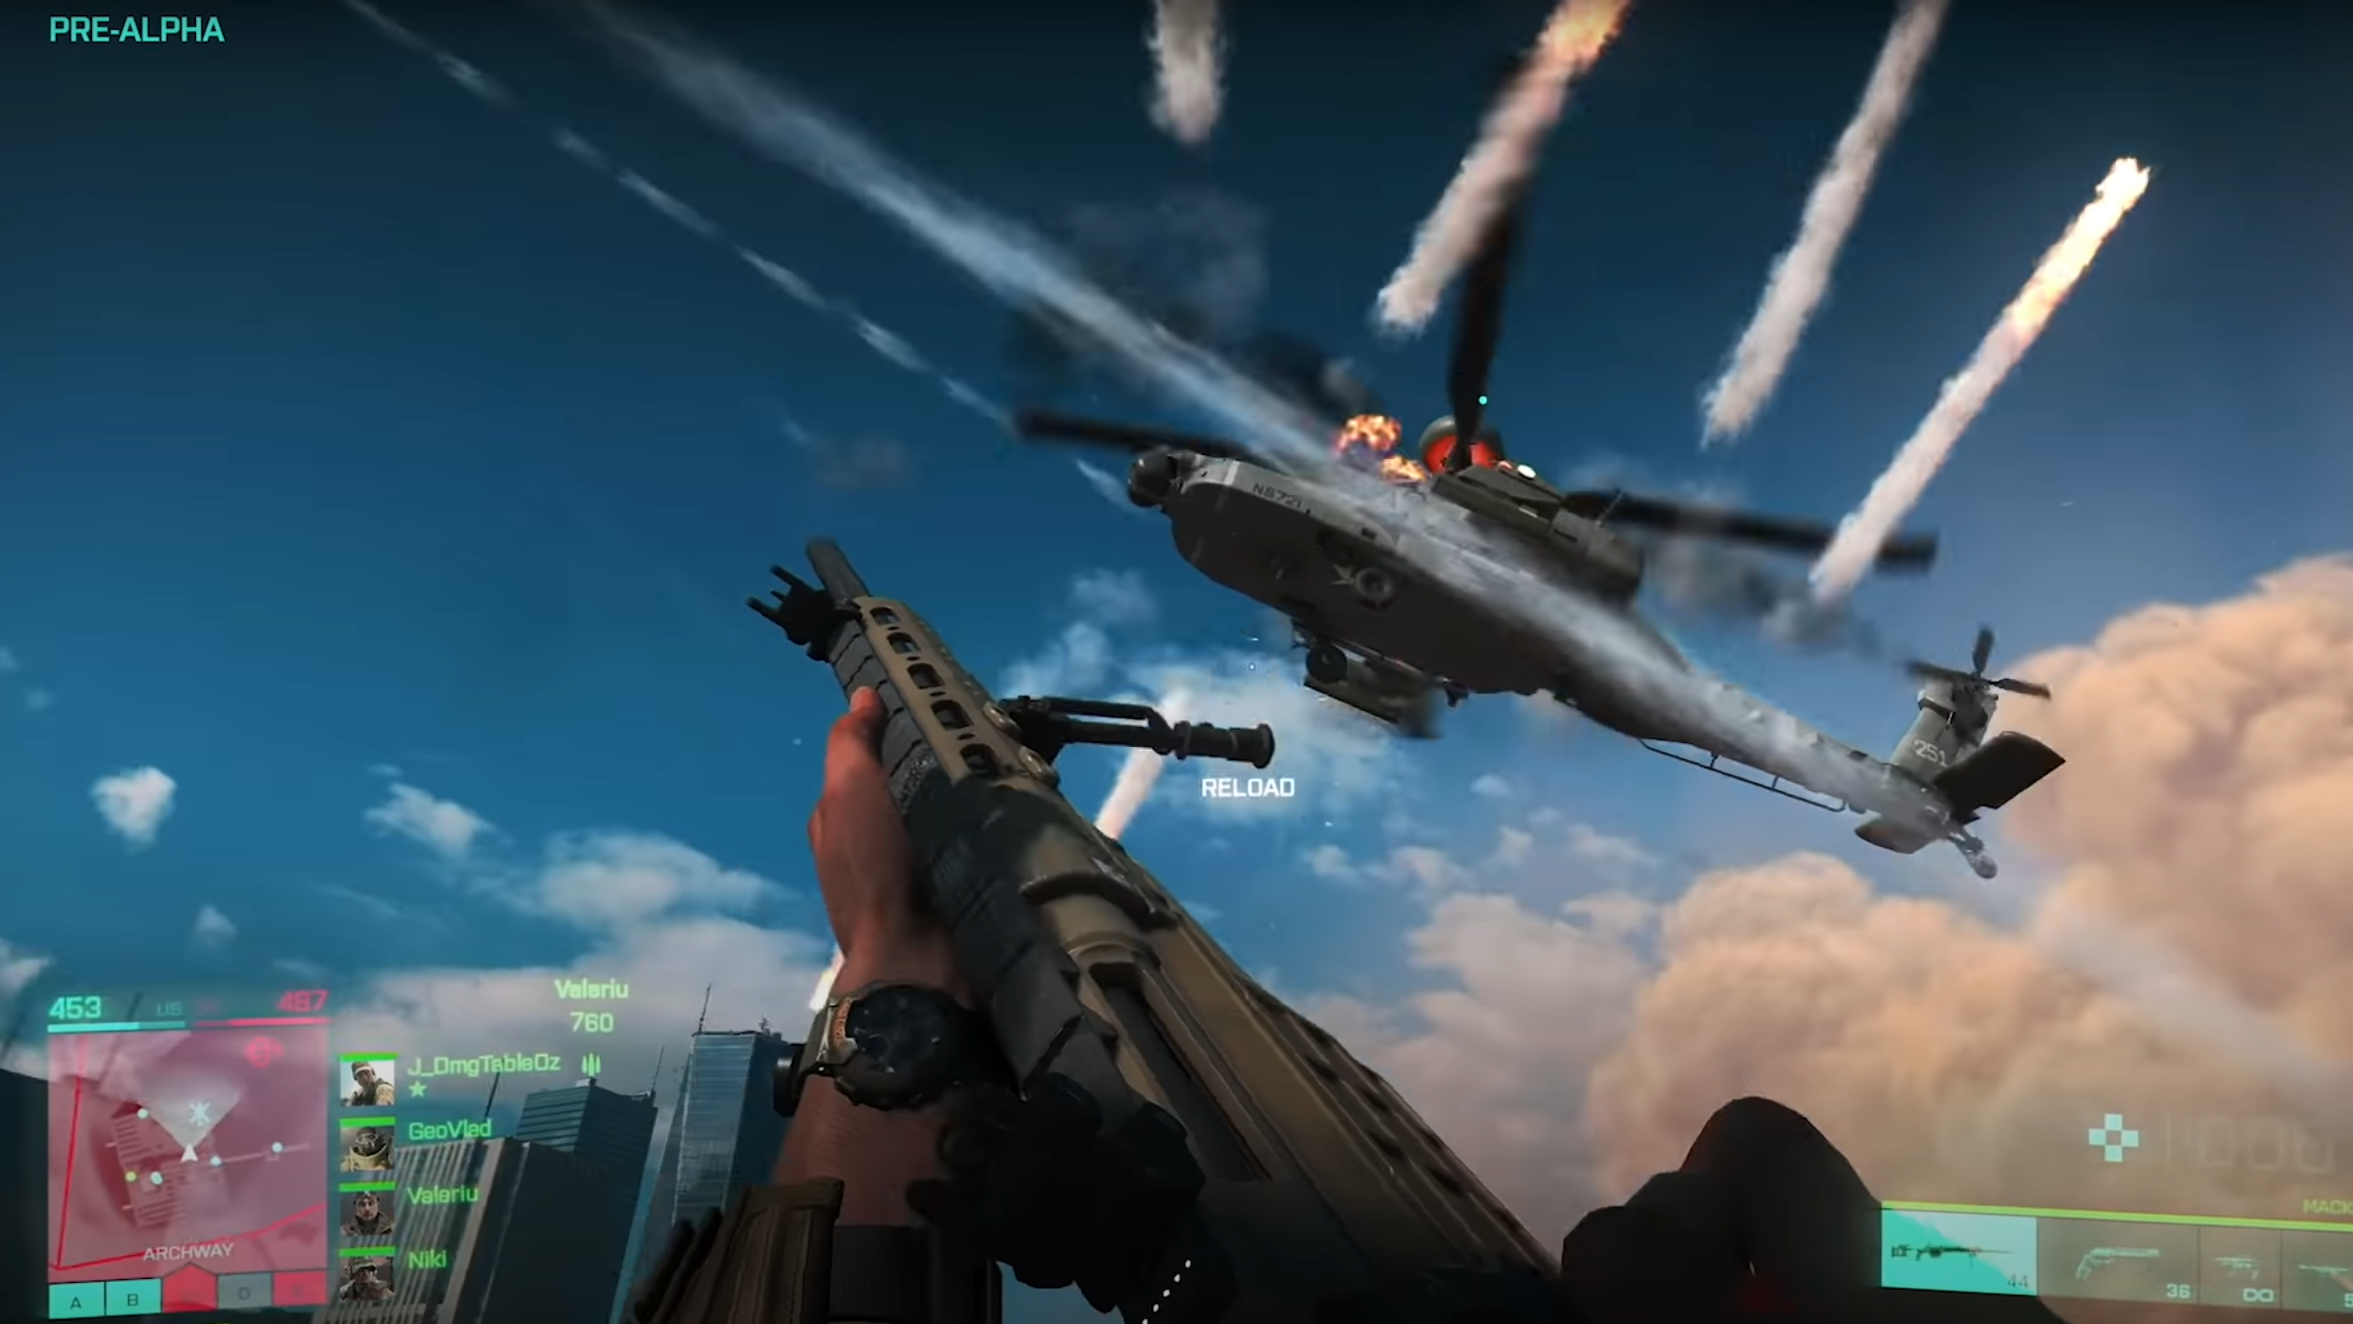 The ‘Battlefield 2042’ gameplay trailer is here with a ton of new guns, armor, and aircraft